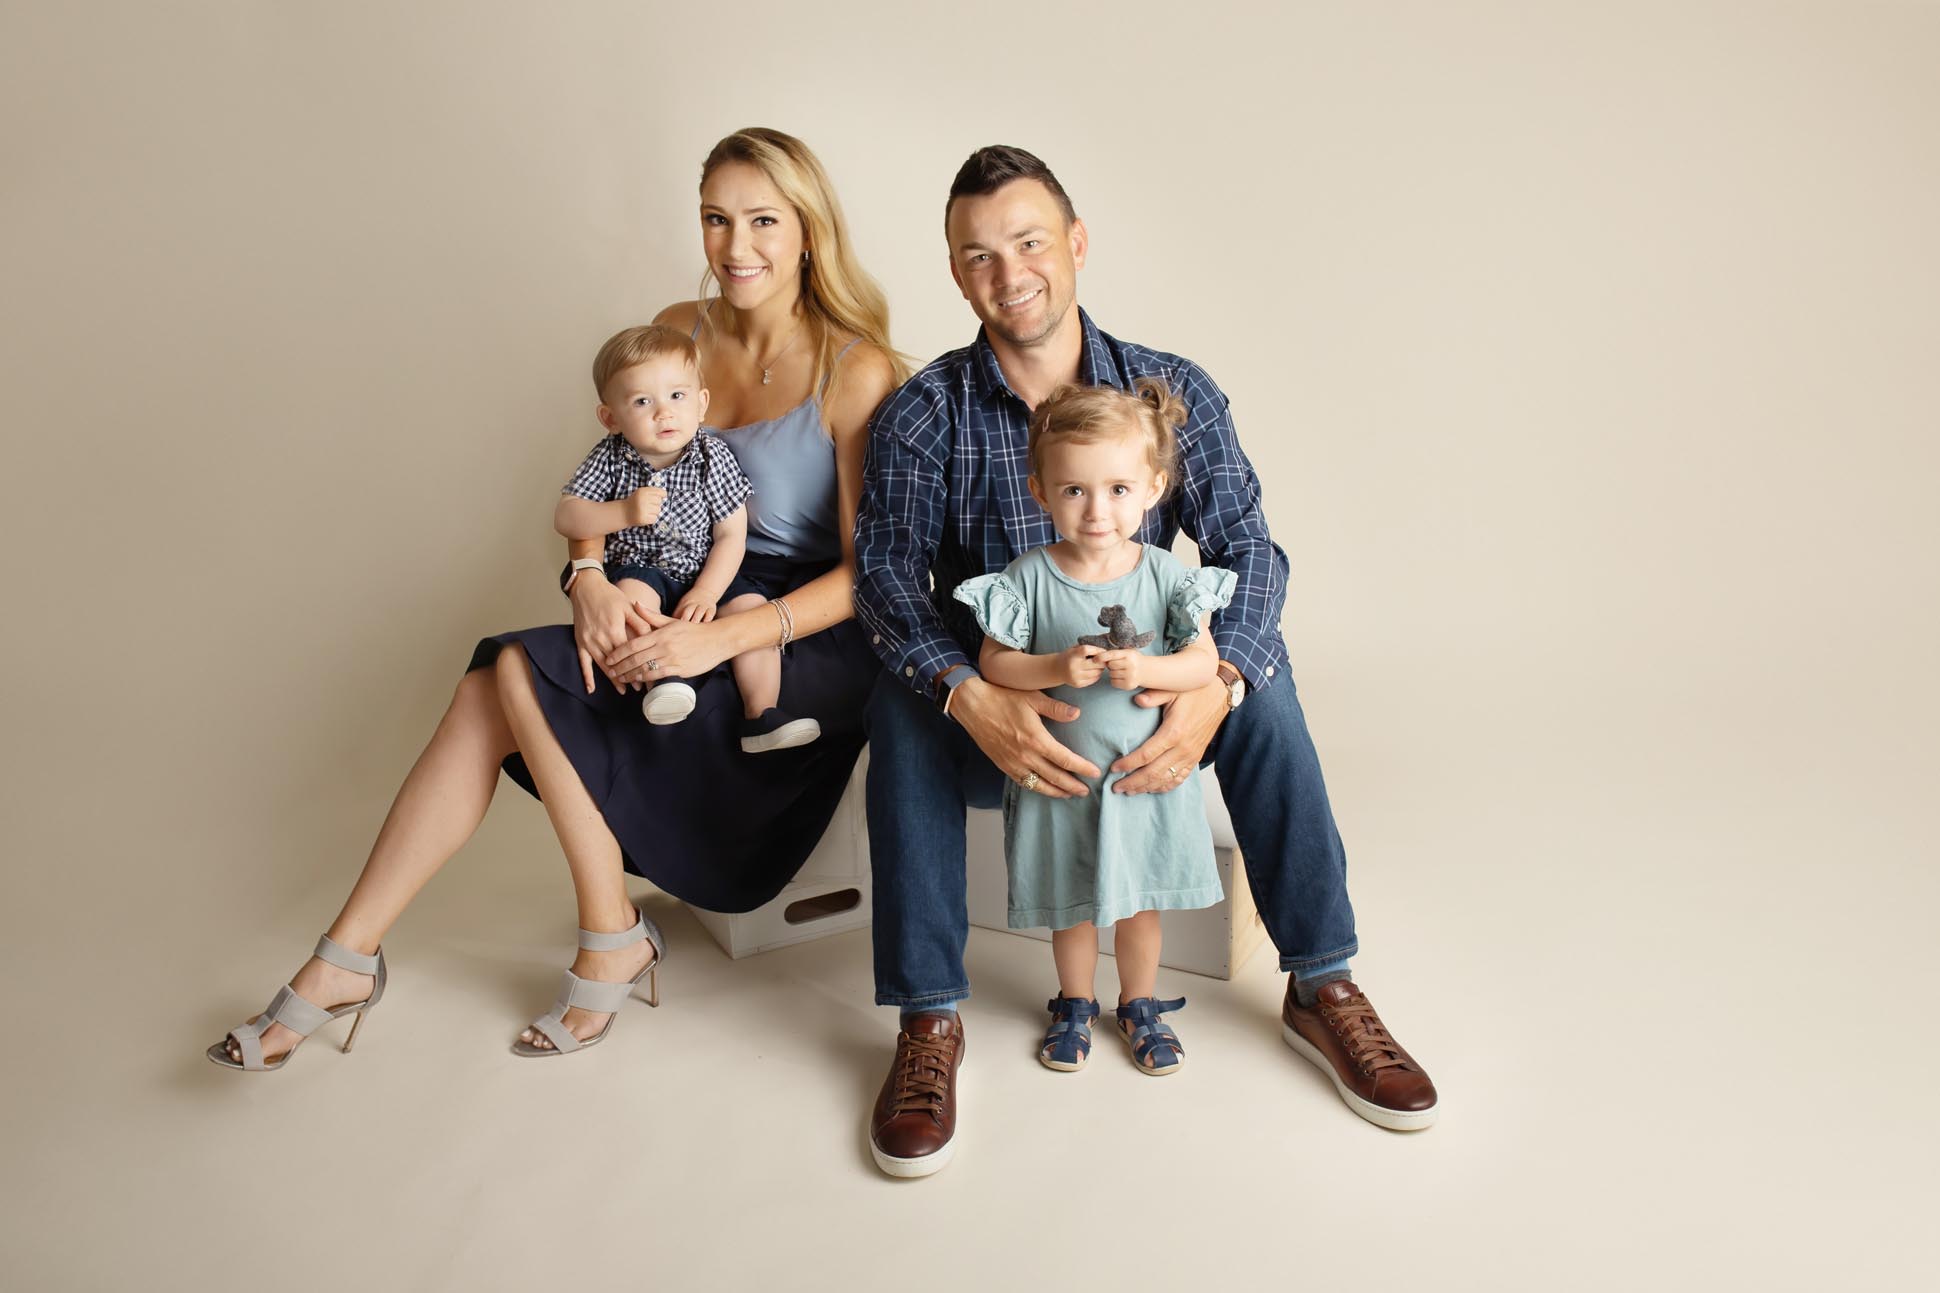 Dallas family photographer displays picture of young family during a studio portrait session